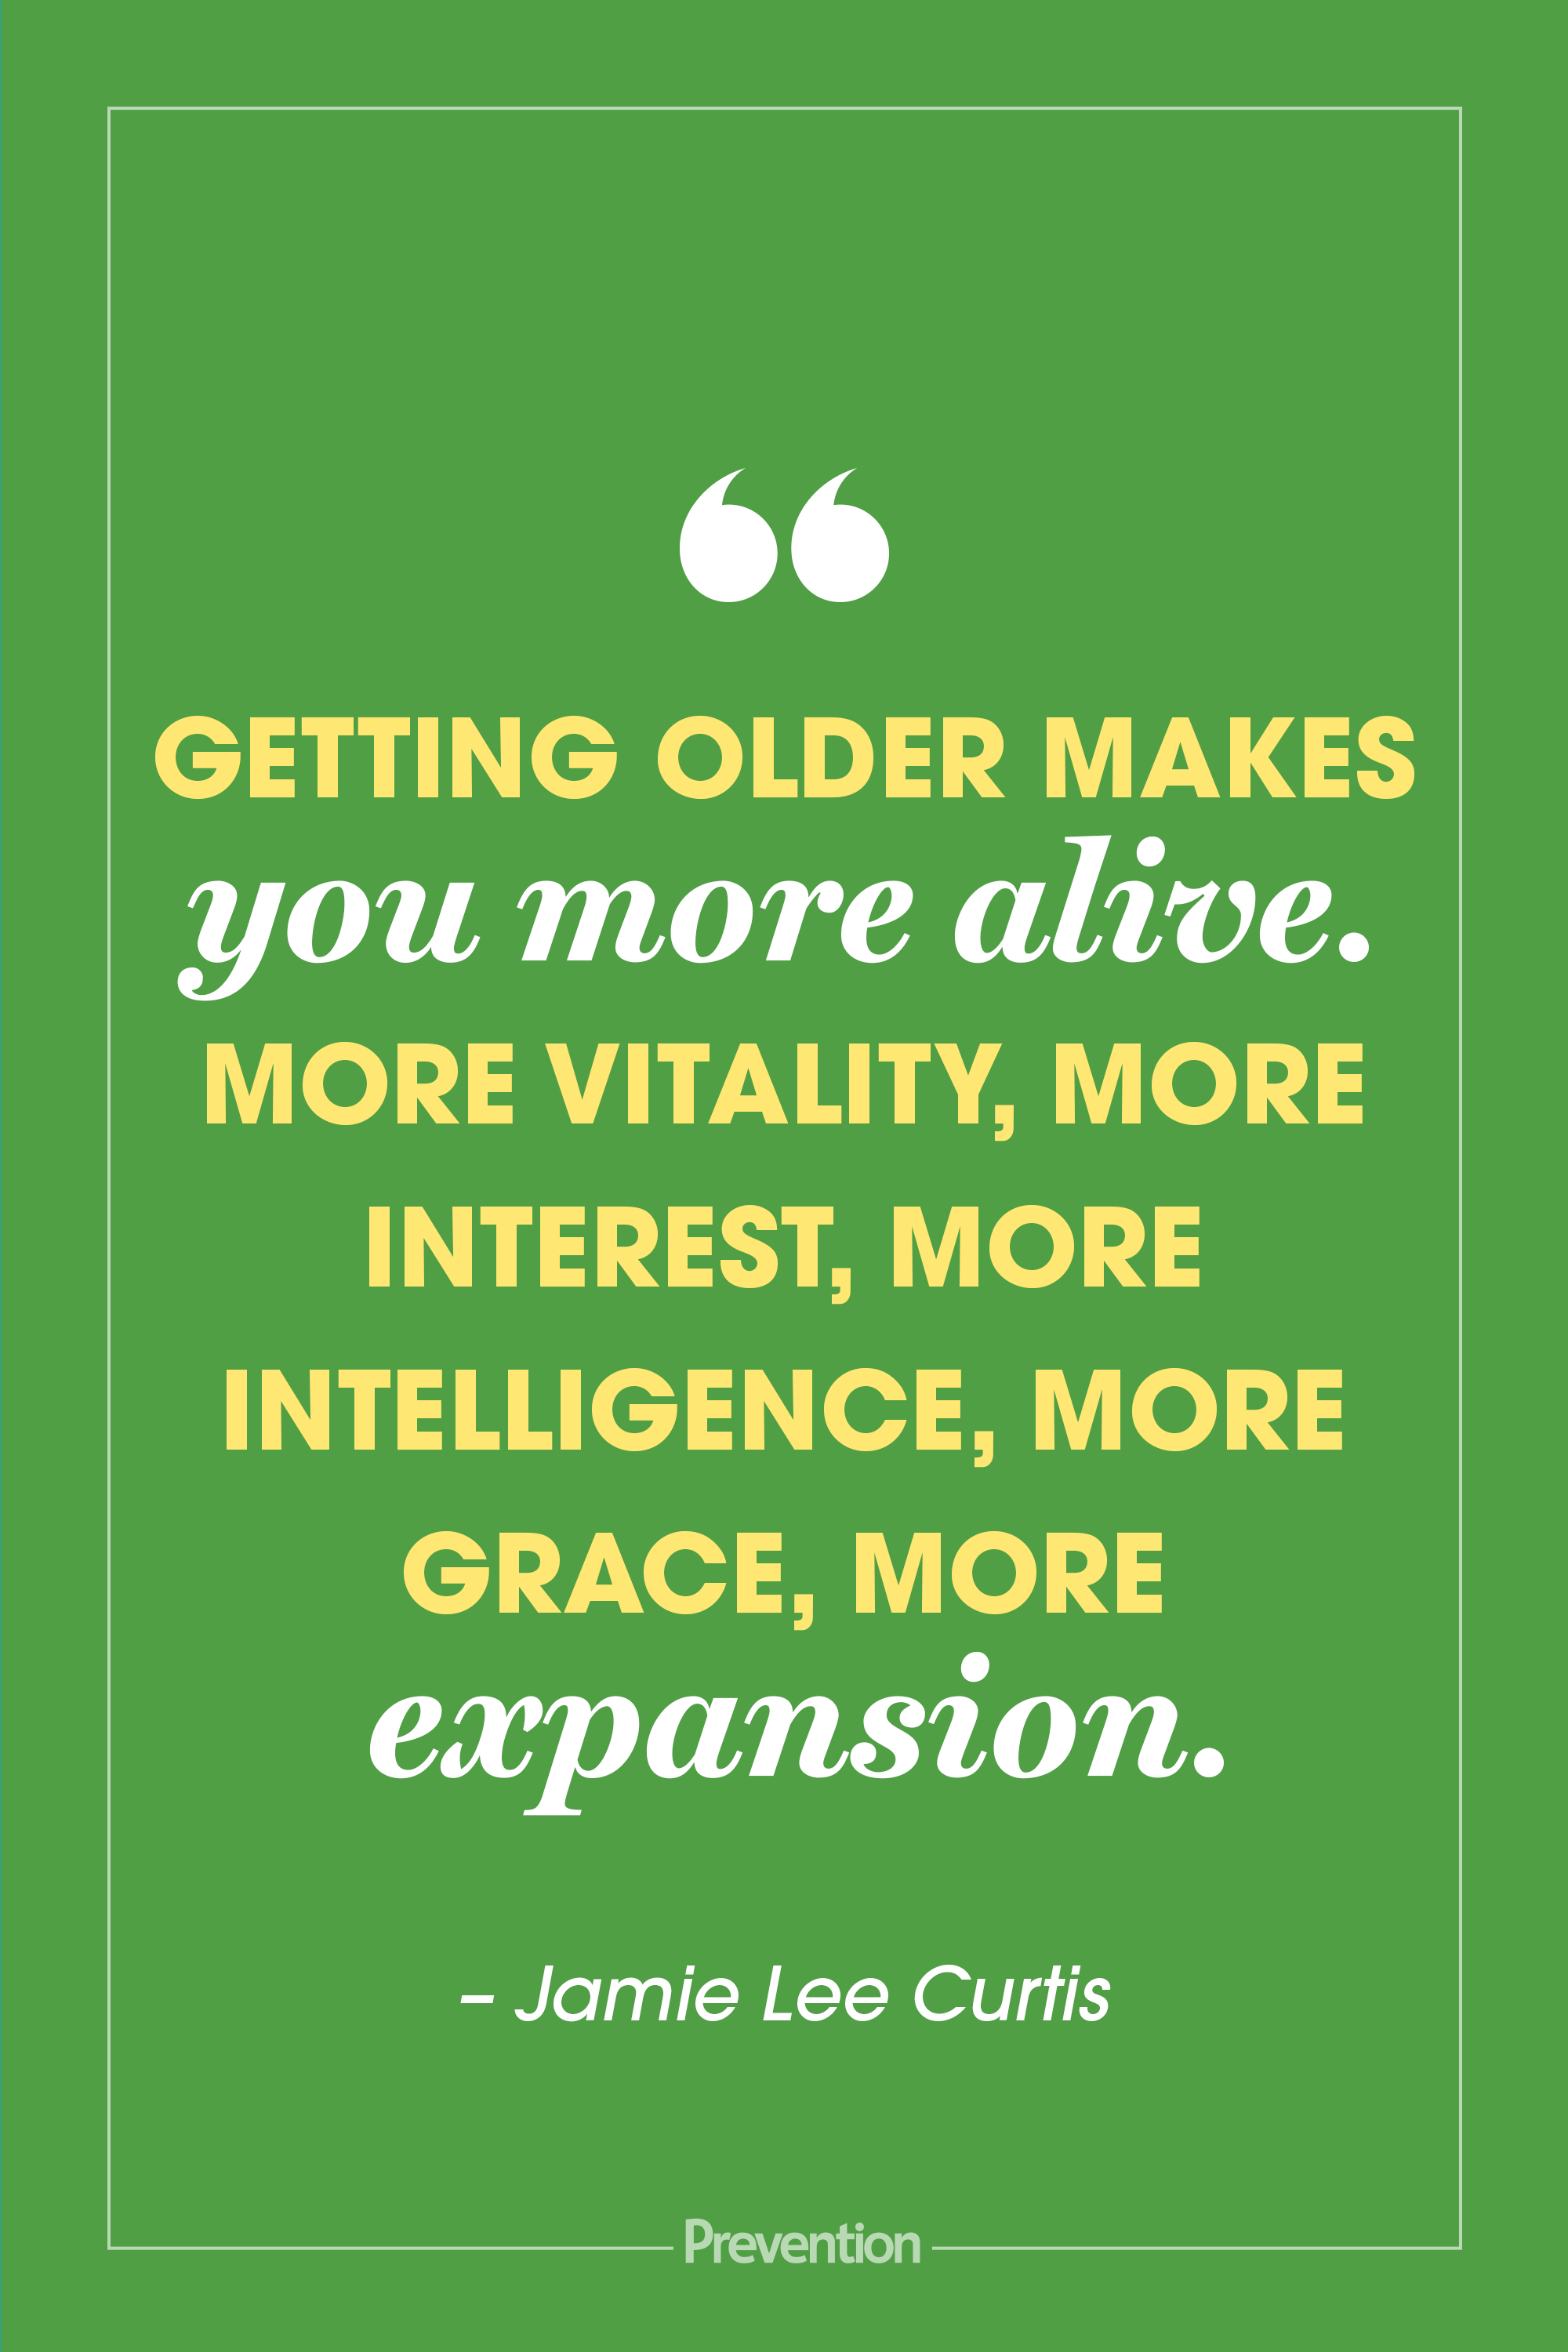 35 Best Age Quotes - Inspiring Celebrity Quotes About Aging